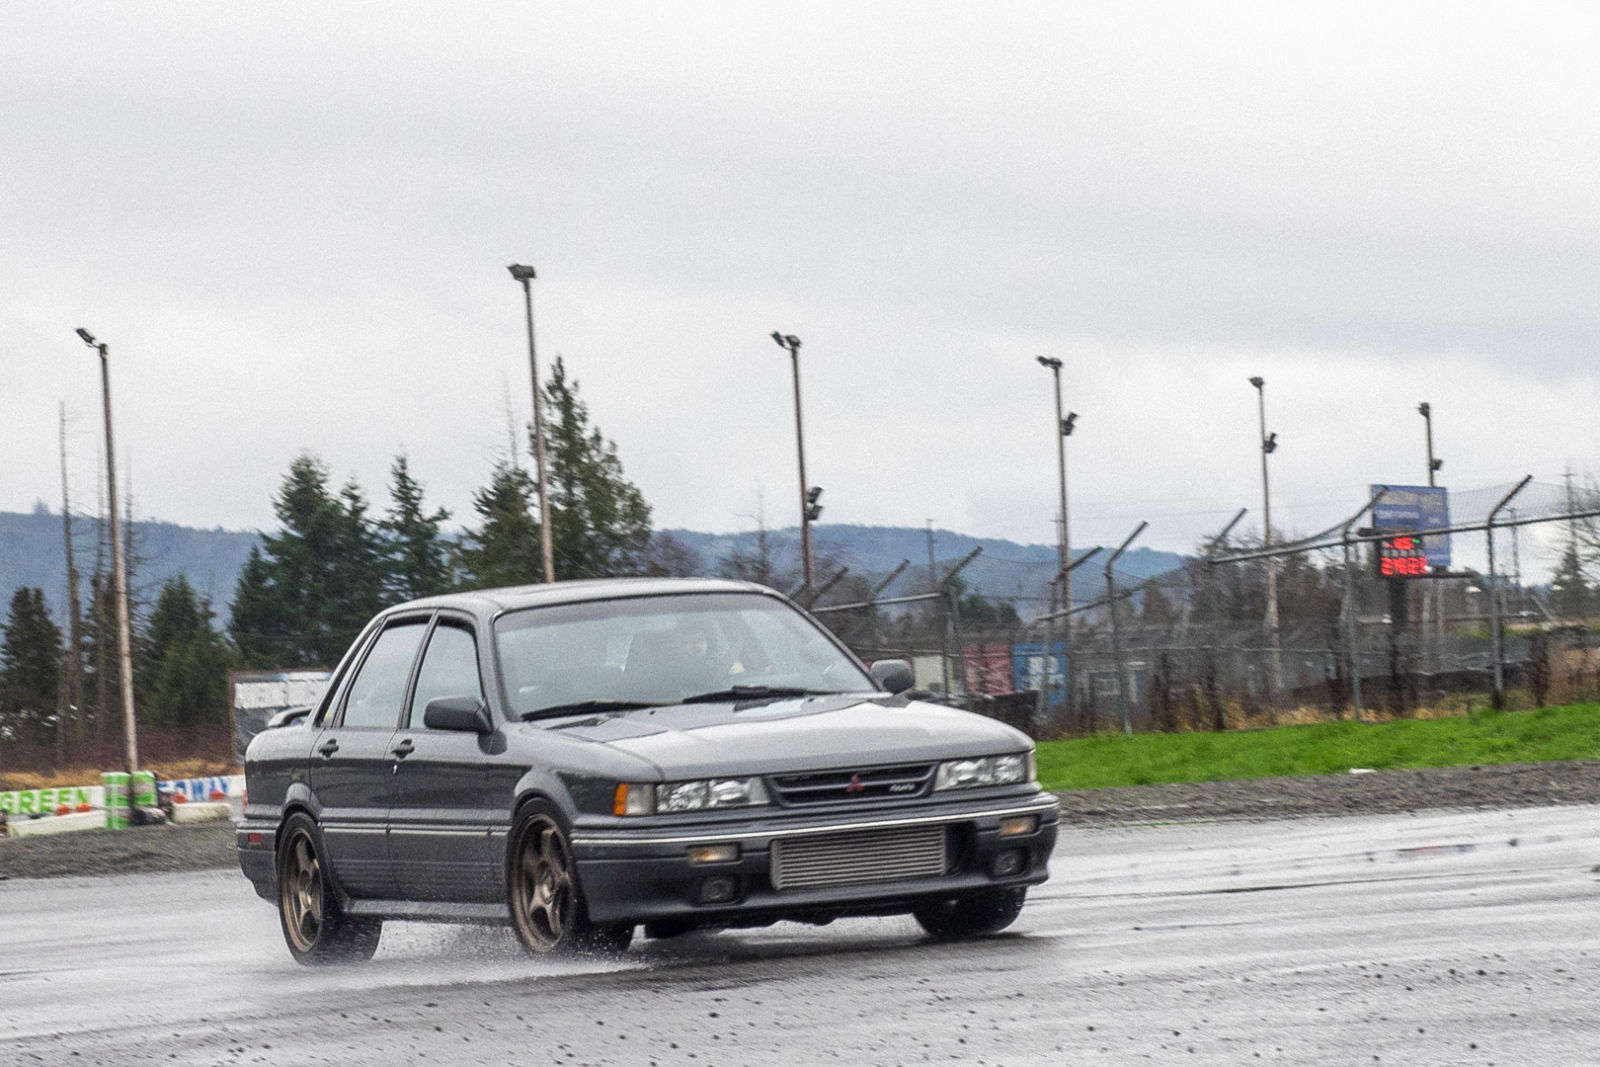 Illustration for article titled Action shots from yesterdays wet autocross